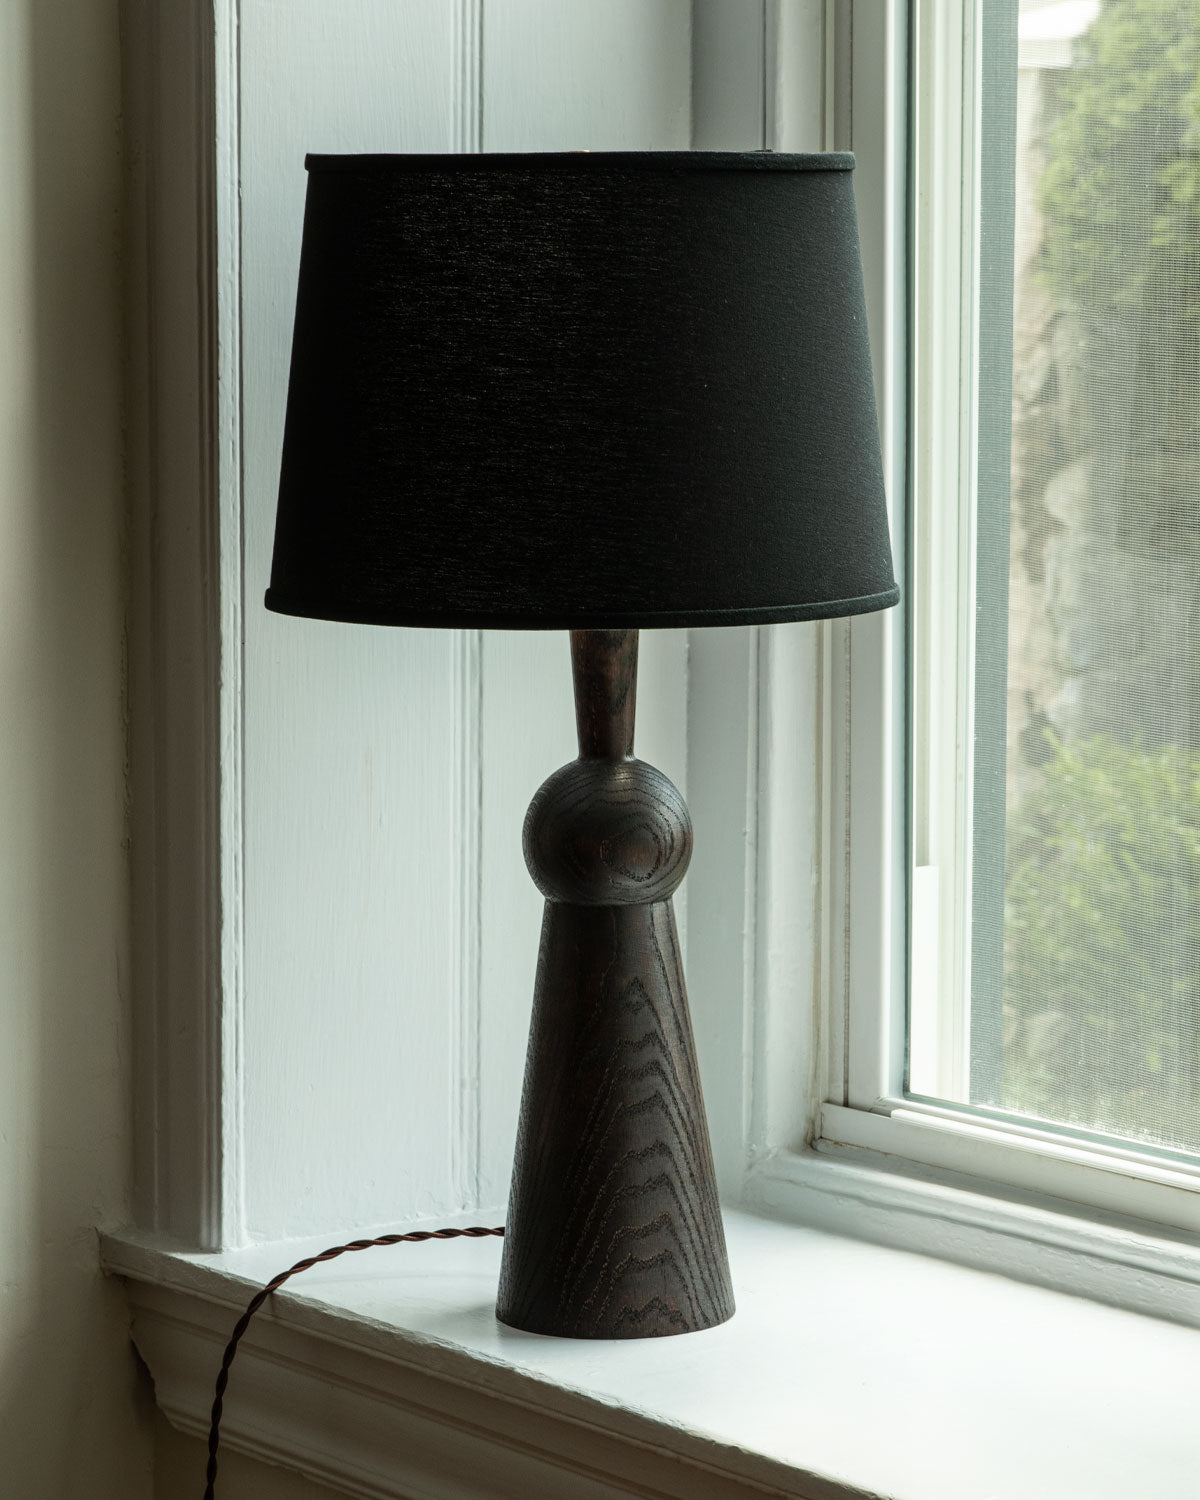 Dark wash solid wood table lamp with gently tapered body and black linen shade